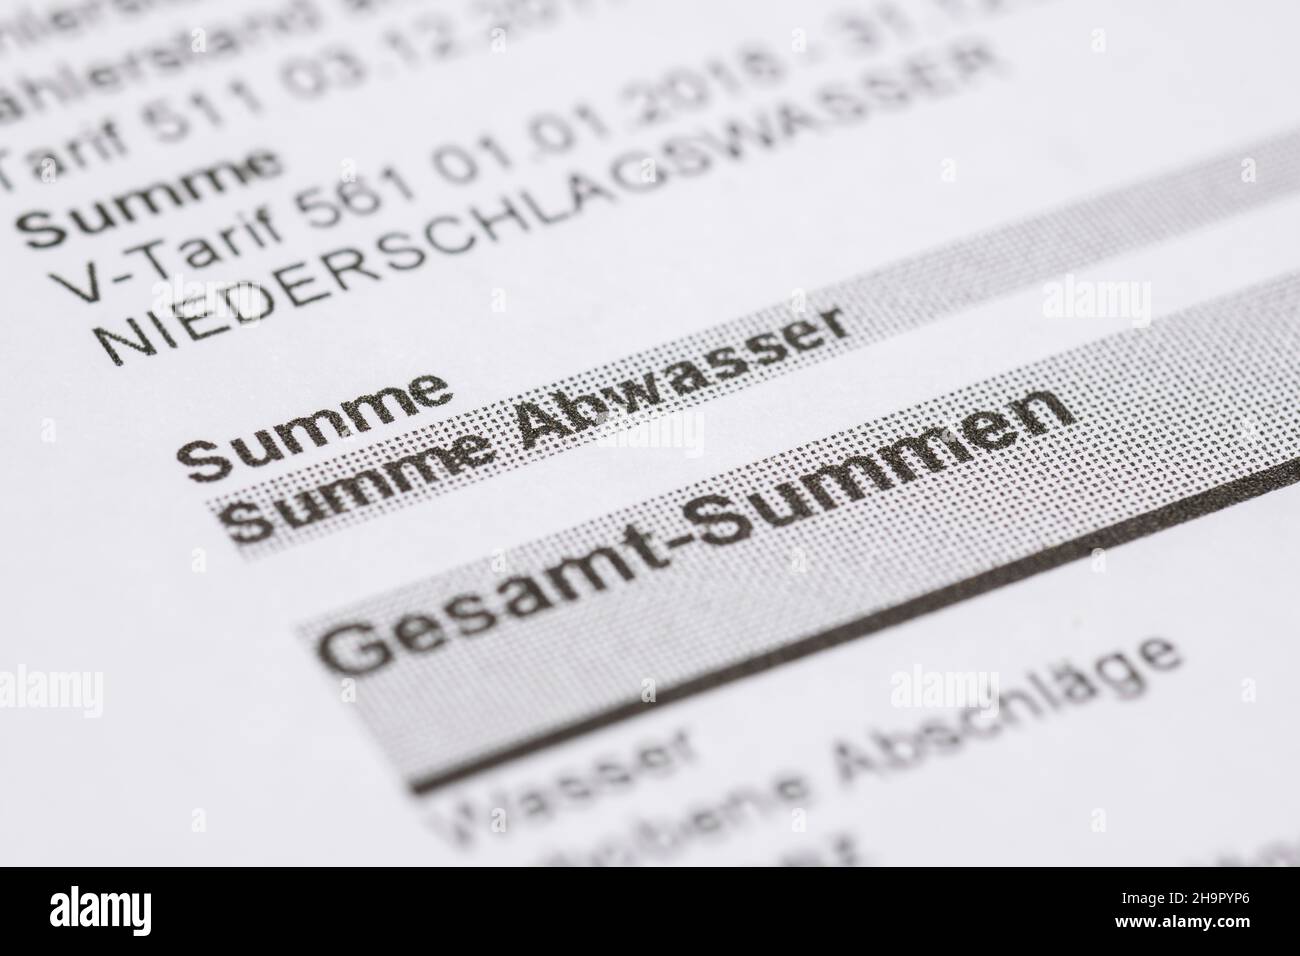 Annual notice, billing, water/wastewater charges, Germany Stock Photo